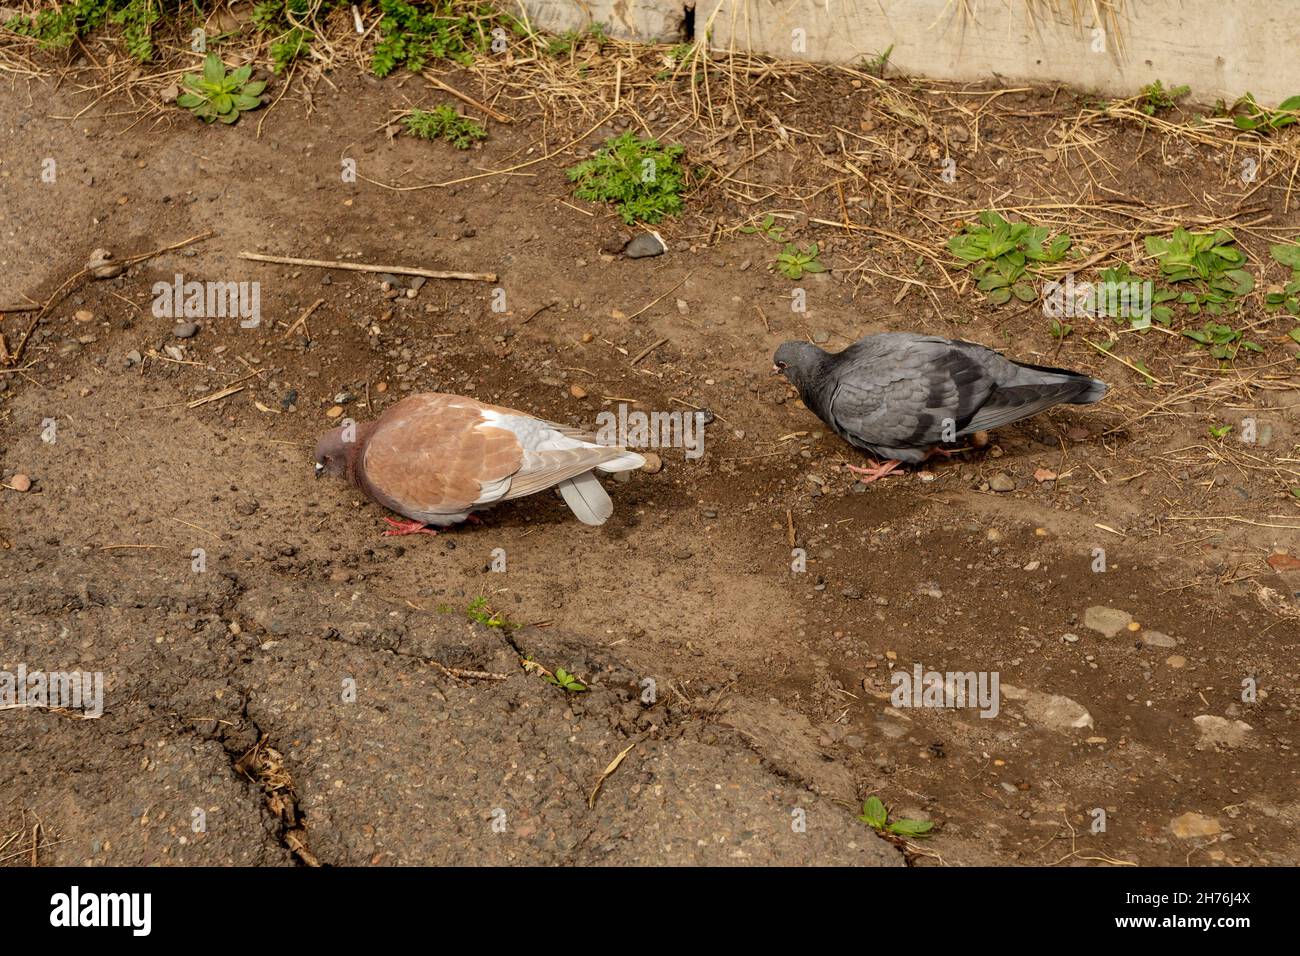 Two plump city pigeons search for food on the ground near the old sidewalk. Stock Photo